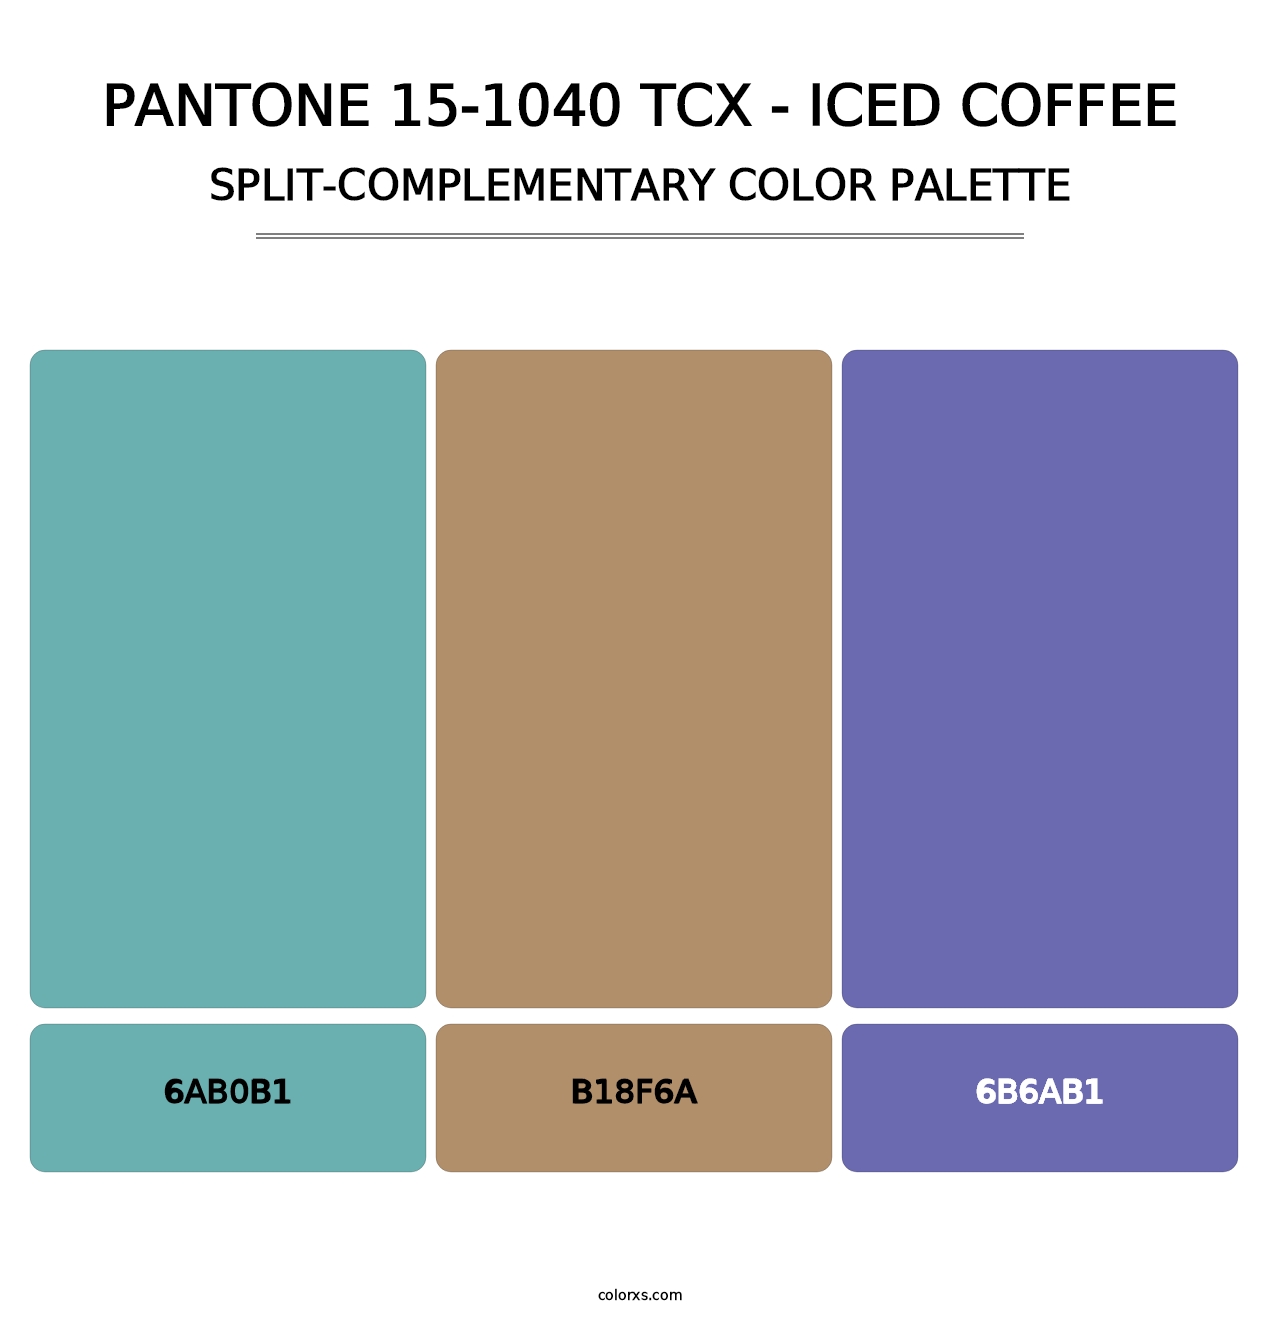 PANTONE 15-1040 TCX - Iced Coffee - Split-Complementary Color Palette